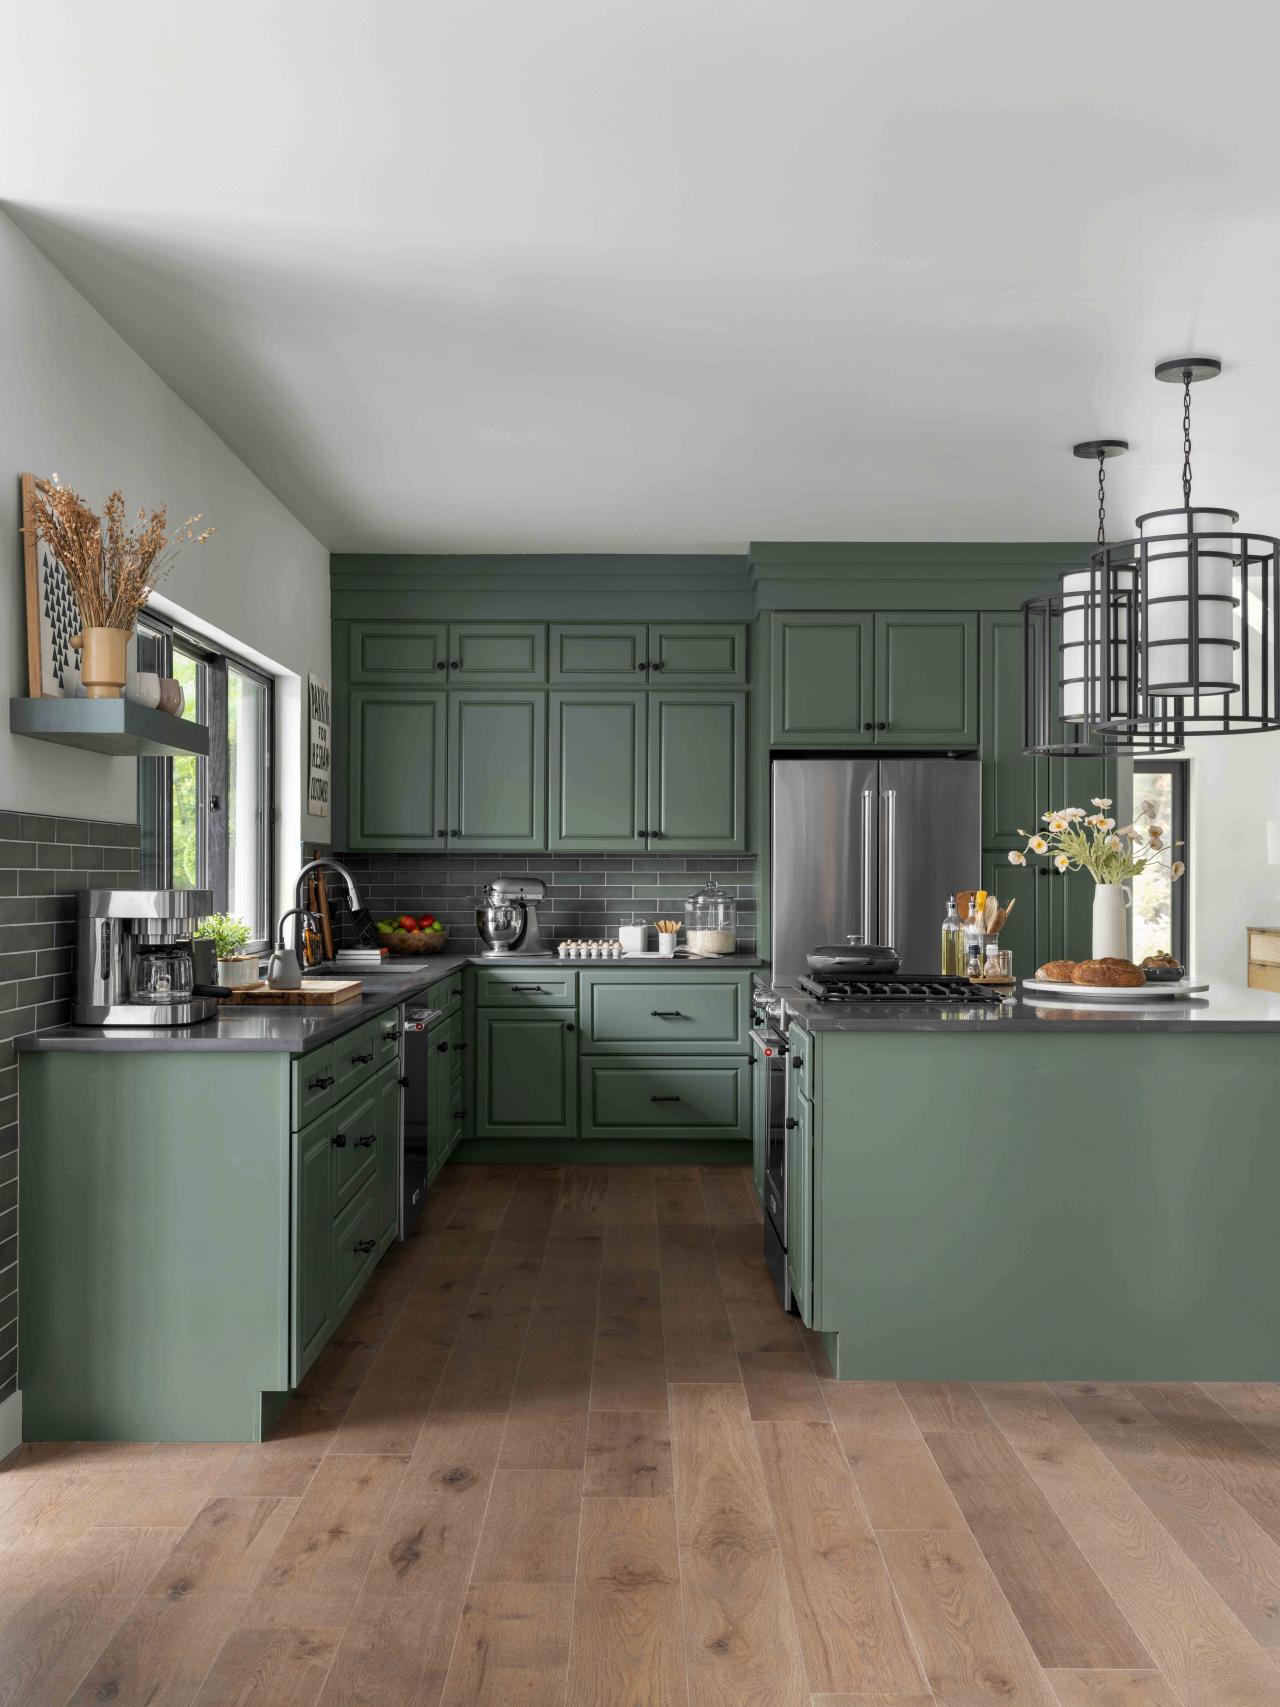 Green Kitchen Design Ideas That You'll Love - The Nordroom